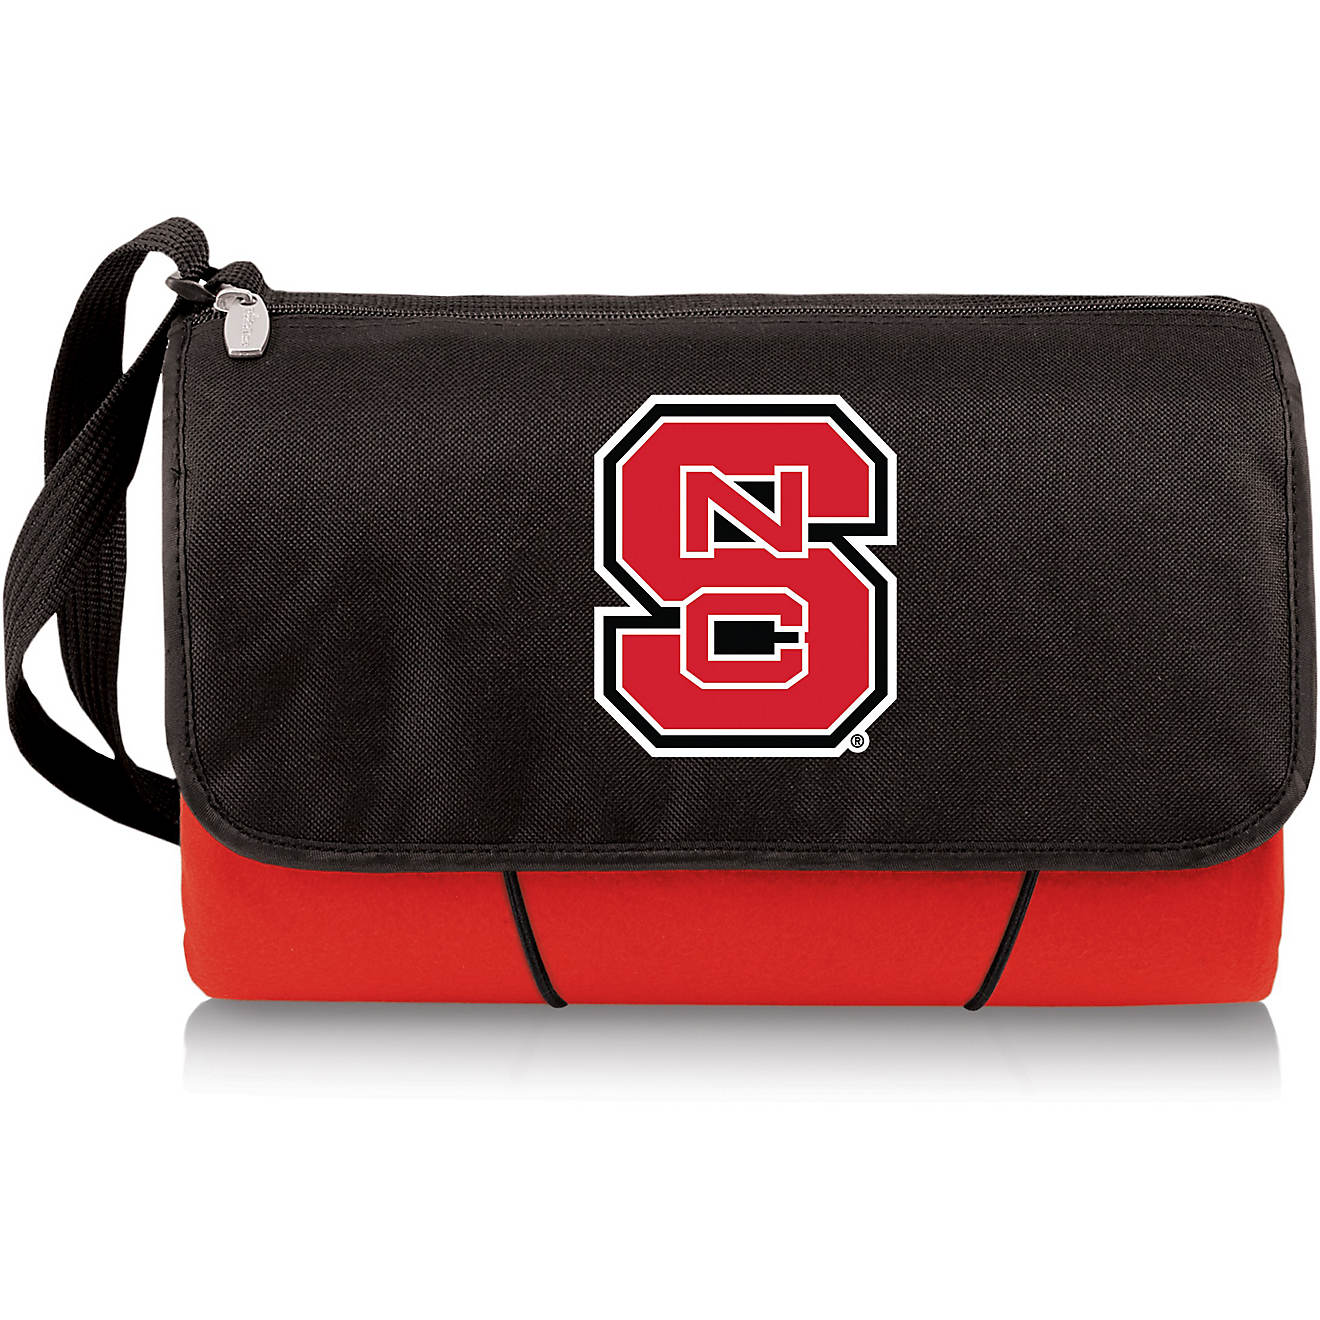 Picnic Time North Carolina State University Blanket Tote                                                                         - view number 1